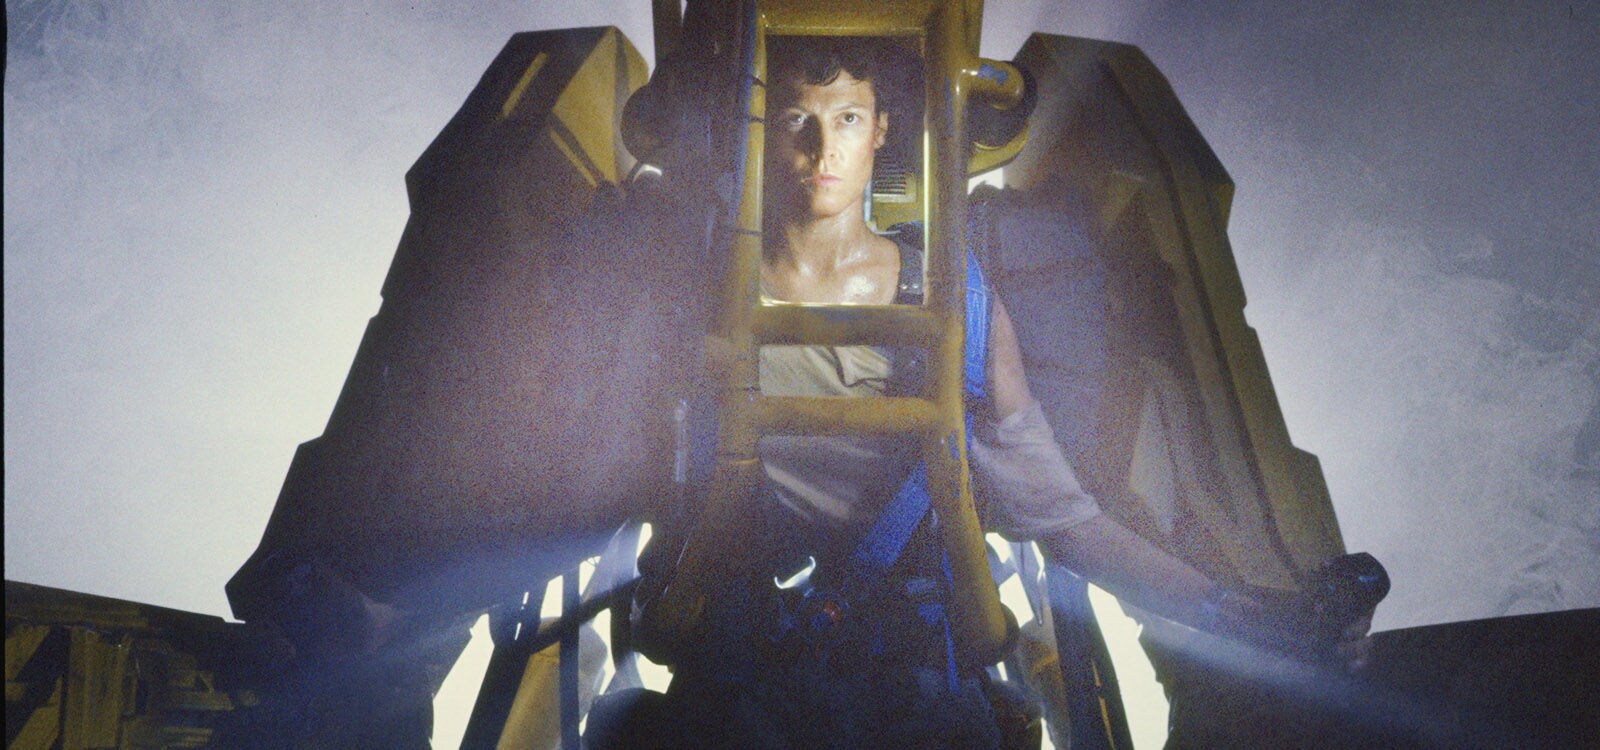 Actor Sigourney Weaver (as Ridley) wearing Powerloader suit in the film "Aliens"